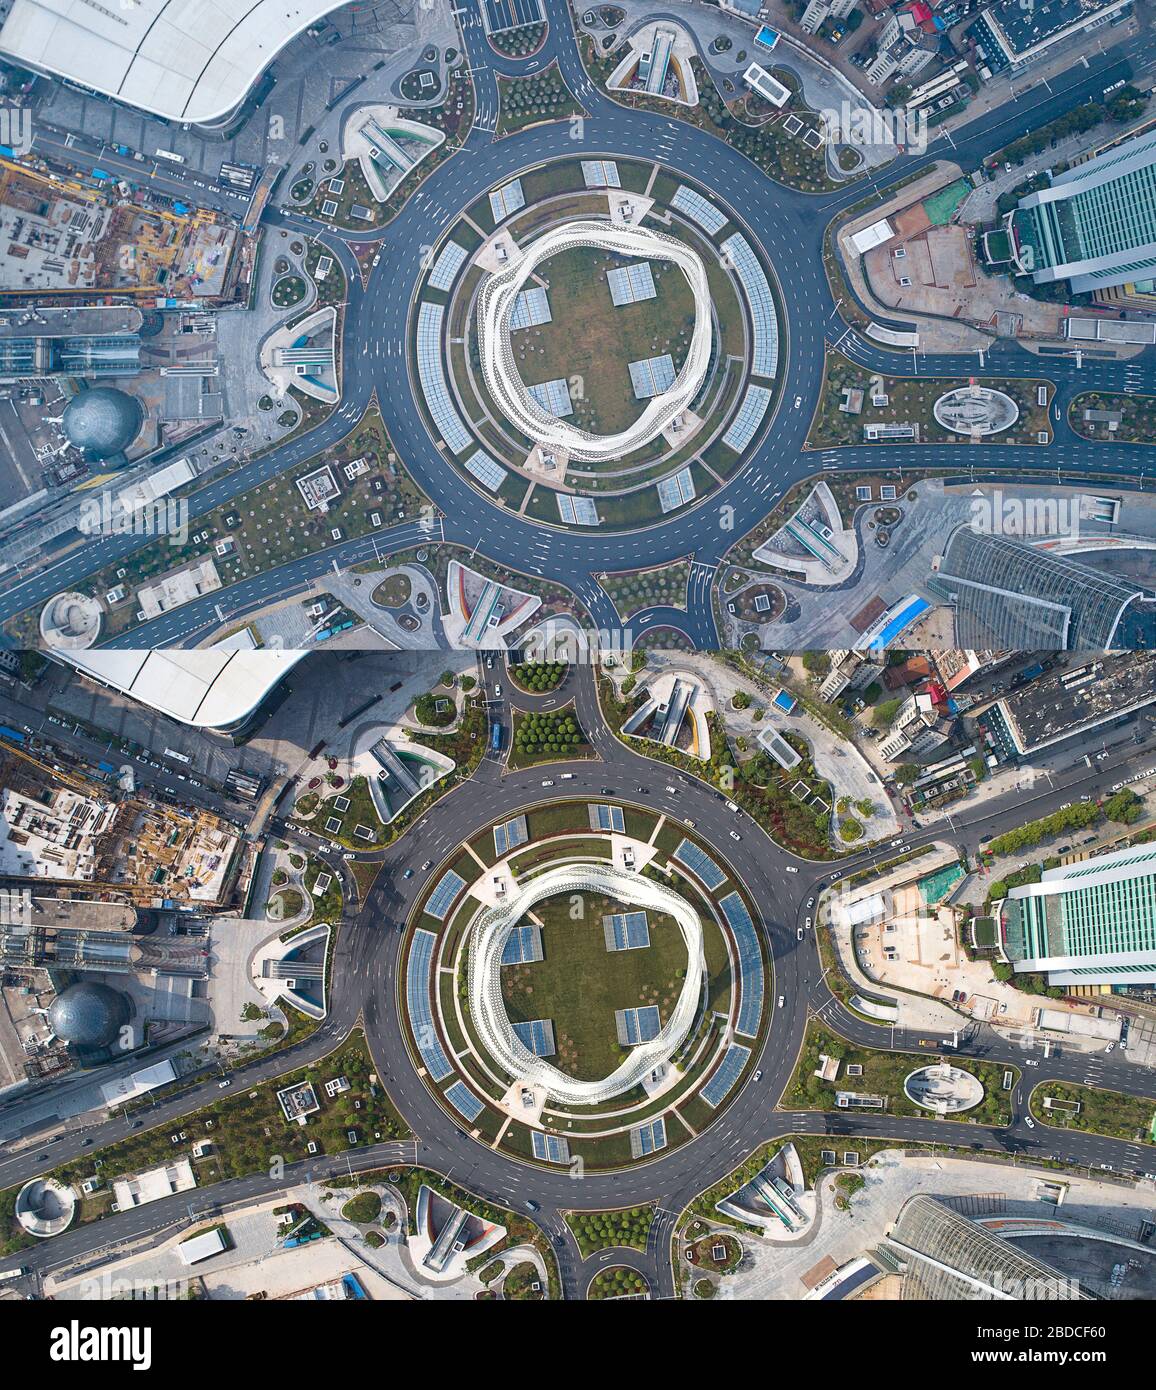 (200408) -- WUHAN, April 8, 2020 (Xinhua) -- Aerial combo photo shows the Optics Valley Square in Wuhan, central China's Hubei Province on Jan. 26, 2020 (upper) and on April 8, 2020.  With long lines of cars streaming through expressway tollgates and masked passengers boarding trains, the megacity of Wuhan in central China lifted outbound travel restrictions on Wednesday after almost 11 weeks of lockdown imposed to stem the COVID-19 outbreak (Xinhua/Xiong Qi) Stock Photo